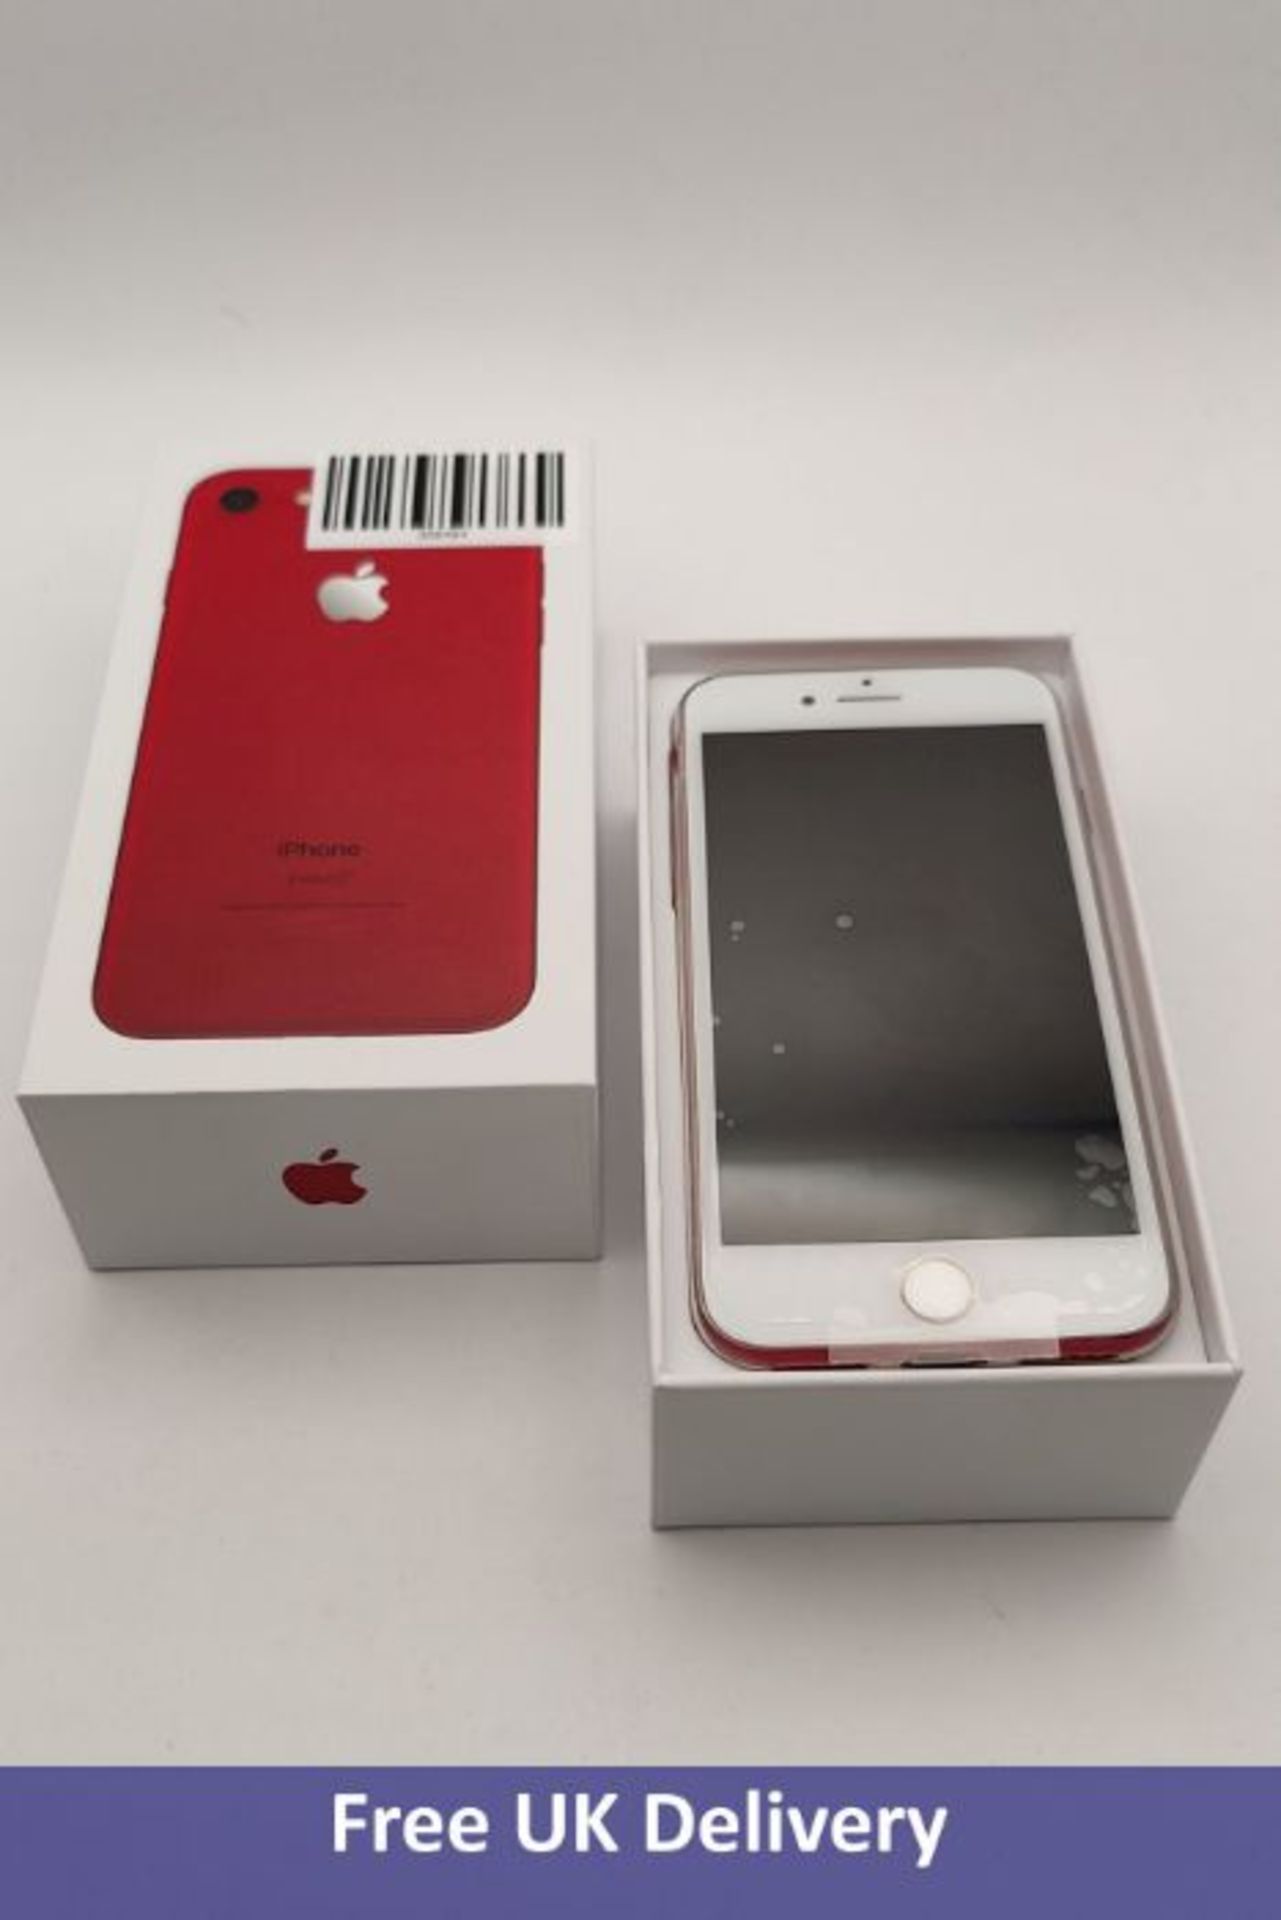 Apple iPhone 7 32GB, Red, A1778, MN9G2LL/A. Refurbished item, boxed with non-original accessories. R